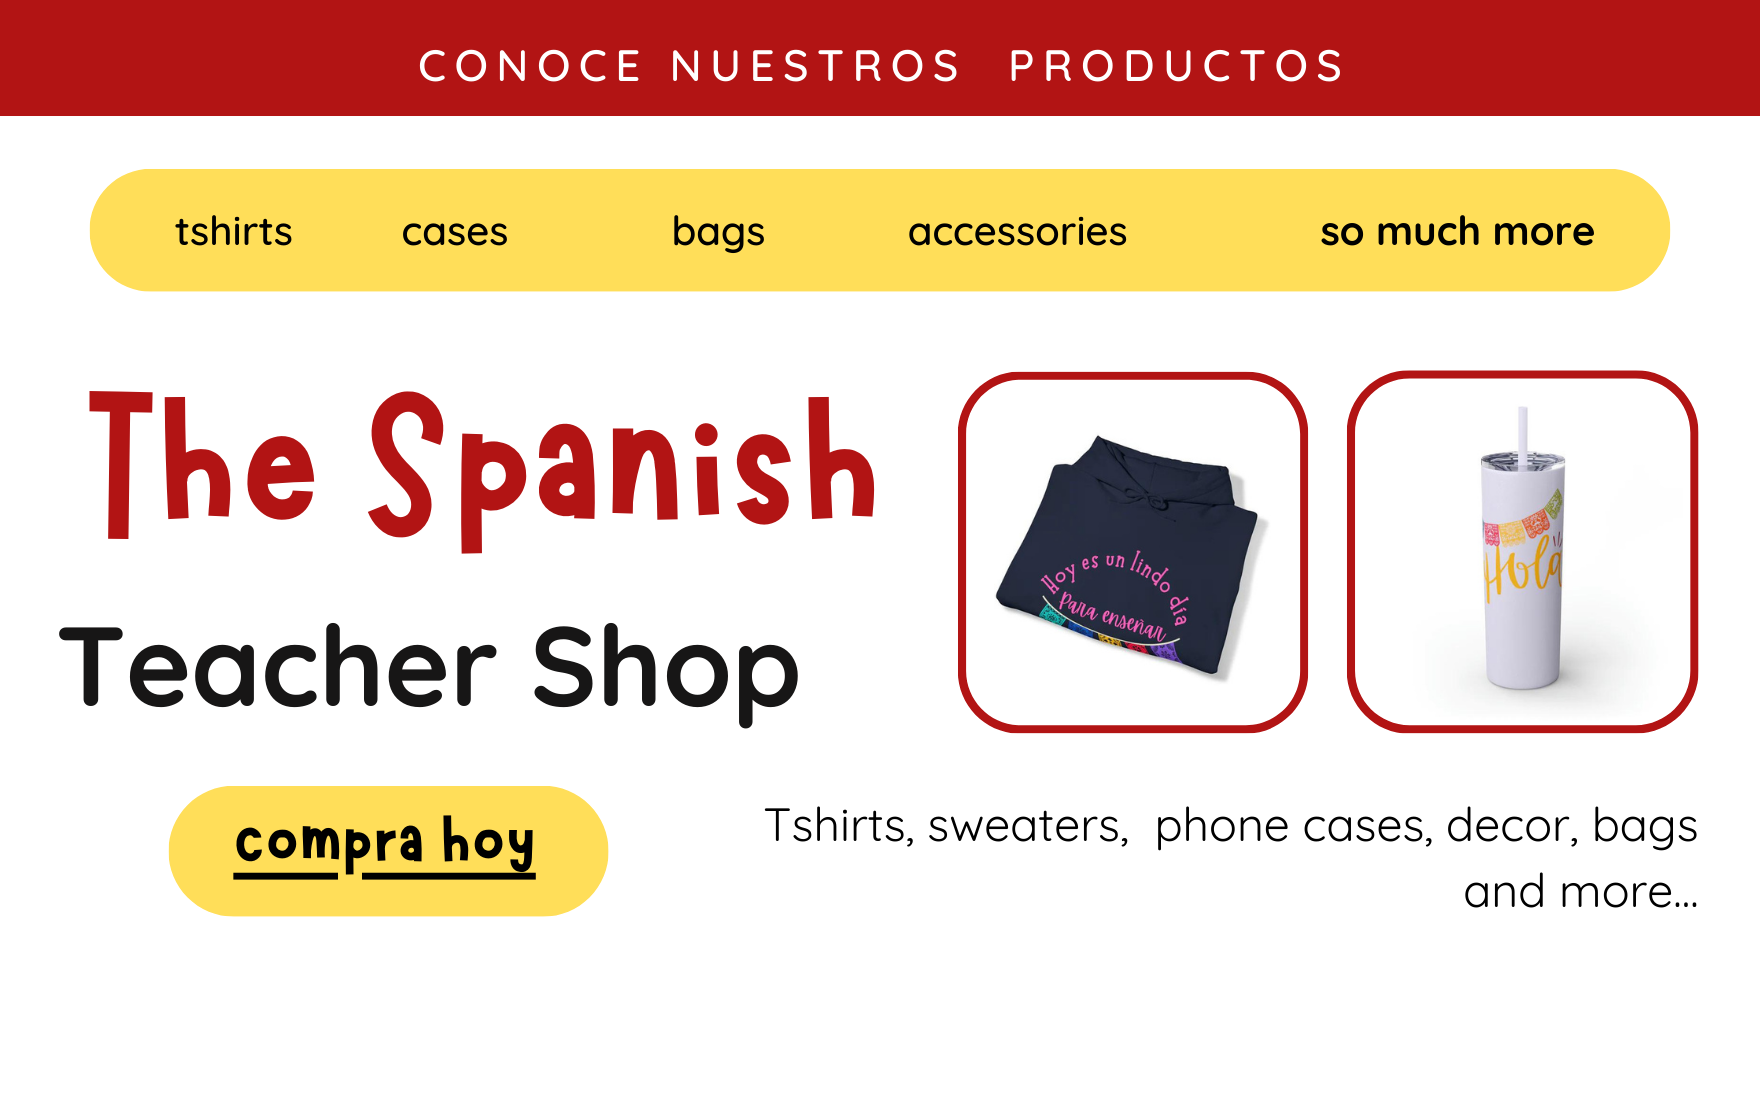 spanish teachers tshirts and accessories and decorations for classroom in the united states